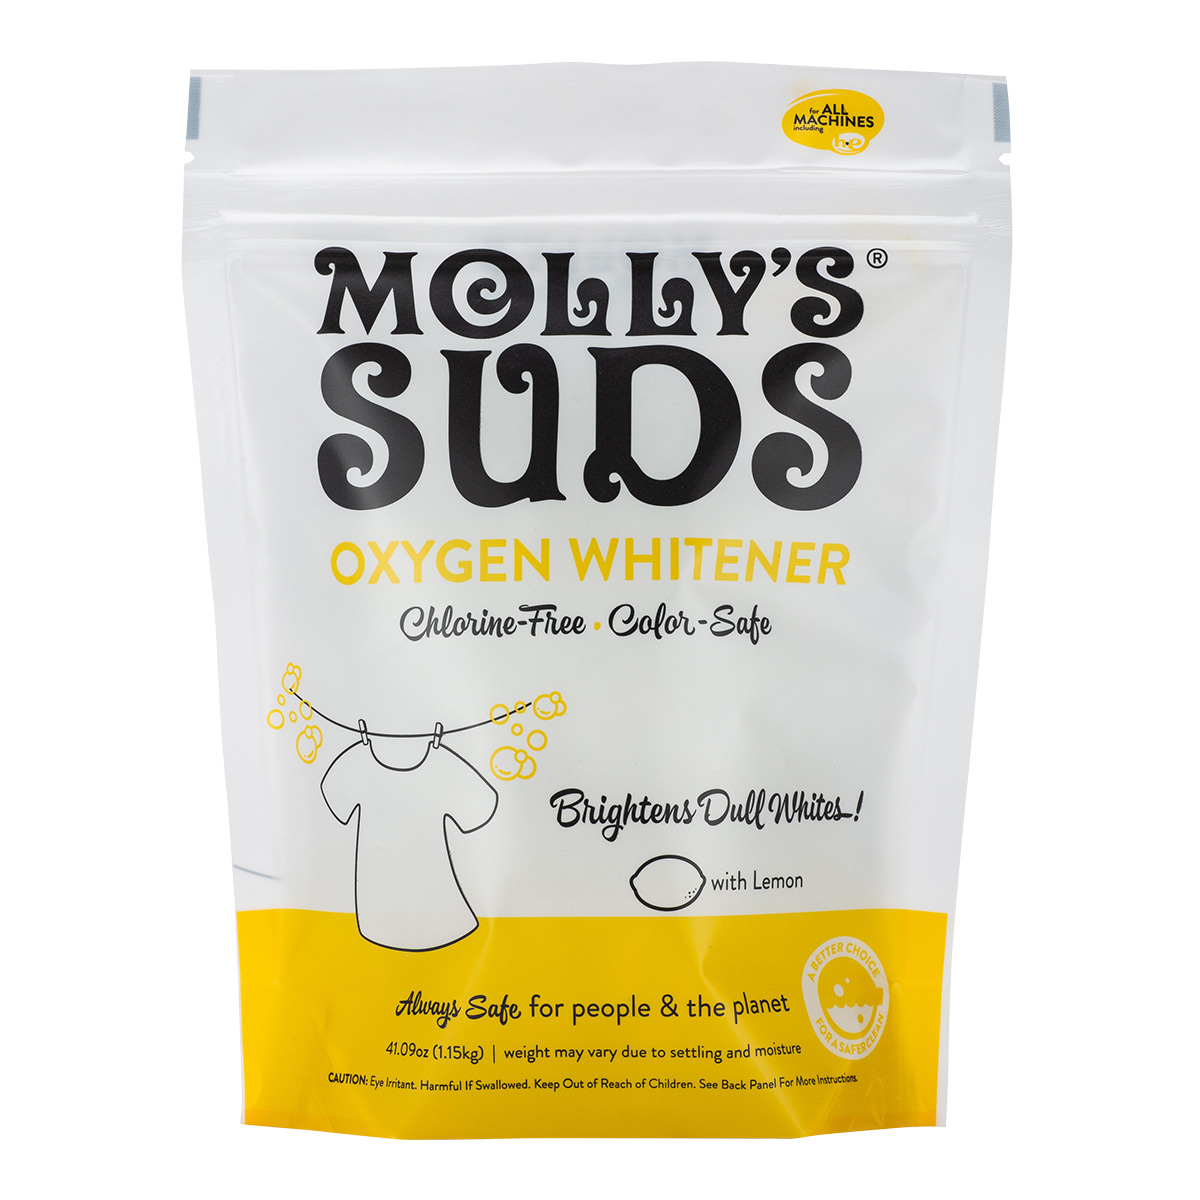 https://www.containerstore.com/catalogimages/480476/10093093-molly-suds-oxygen-whitener-.jpg